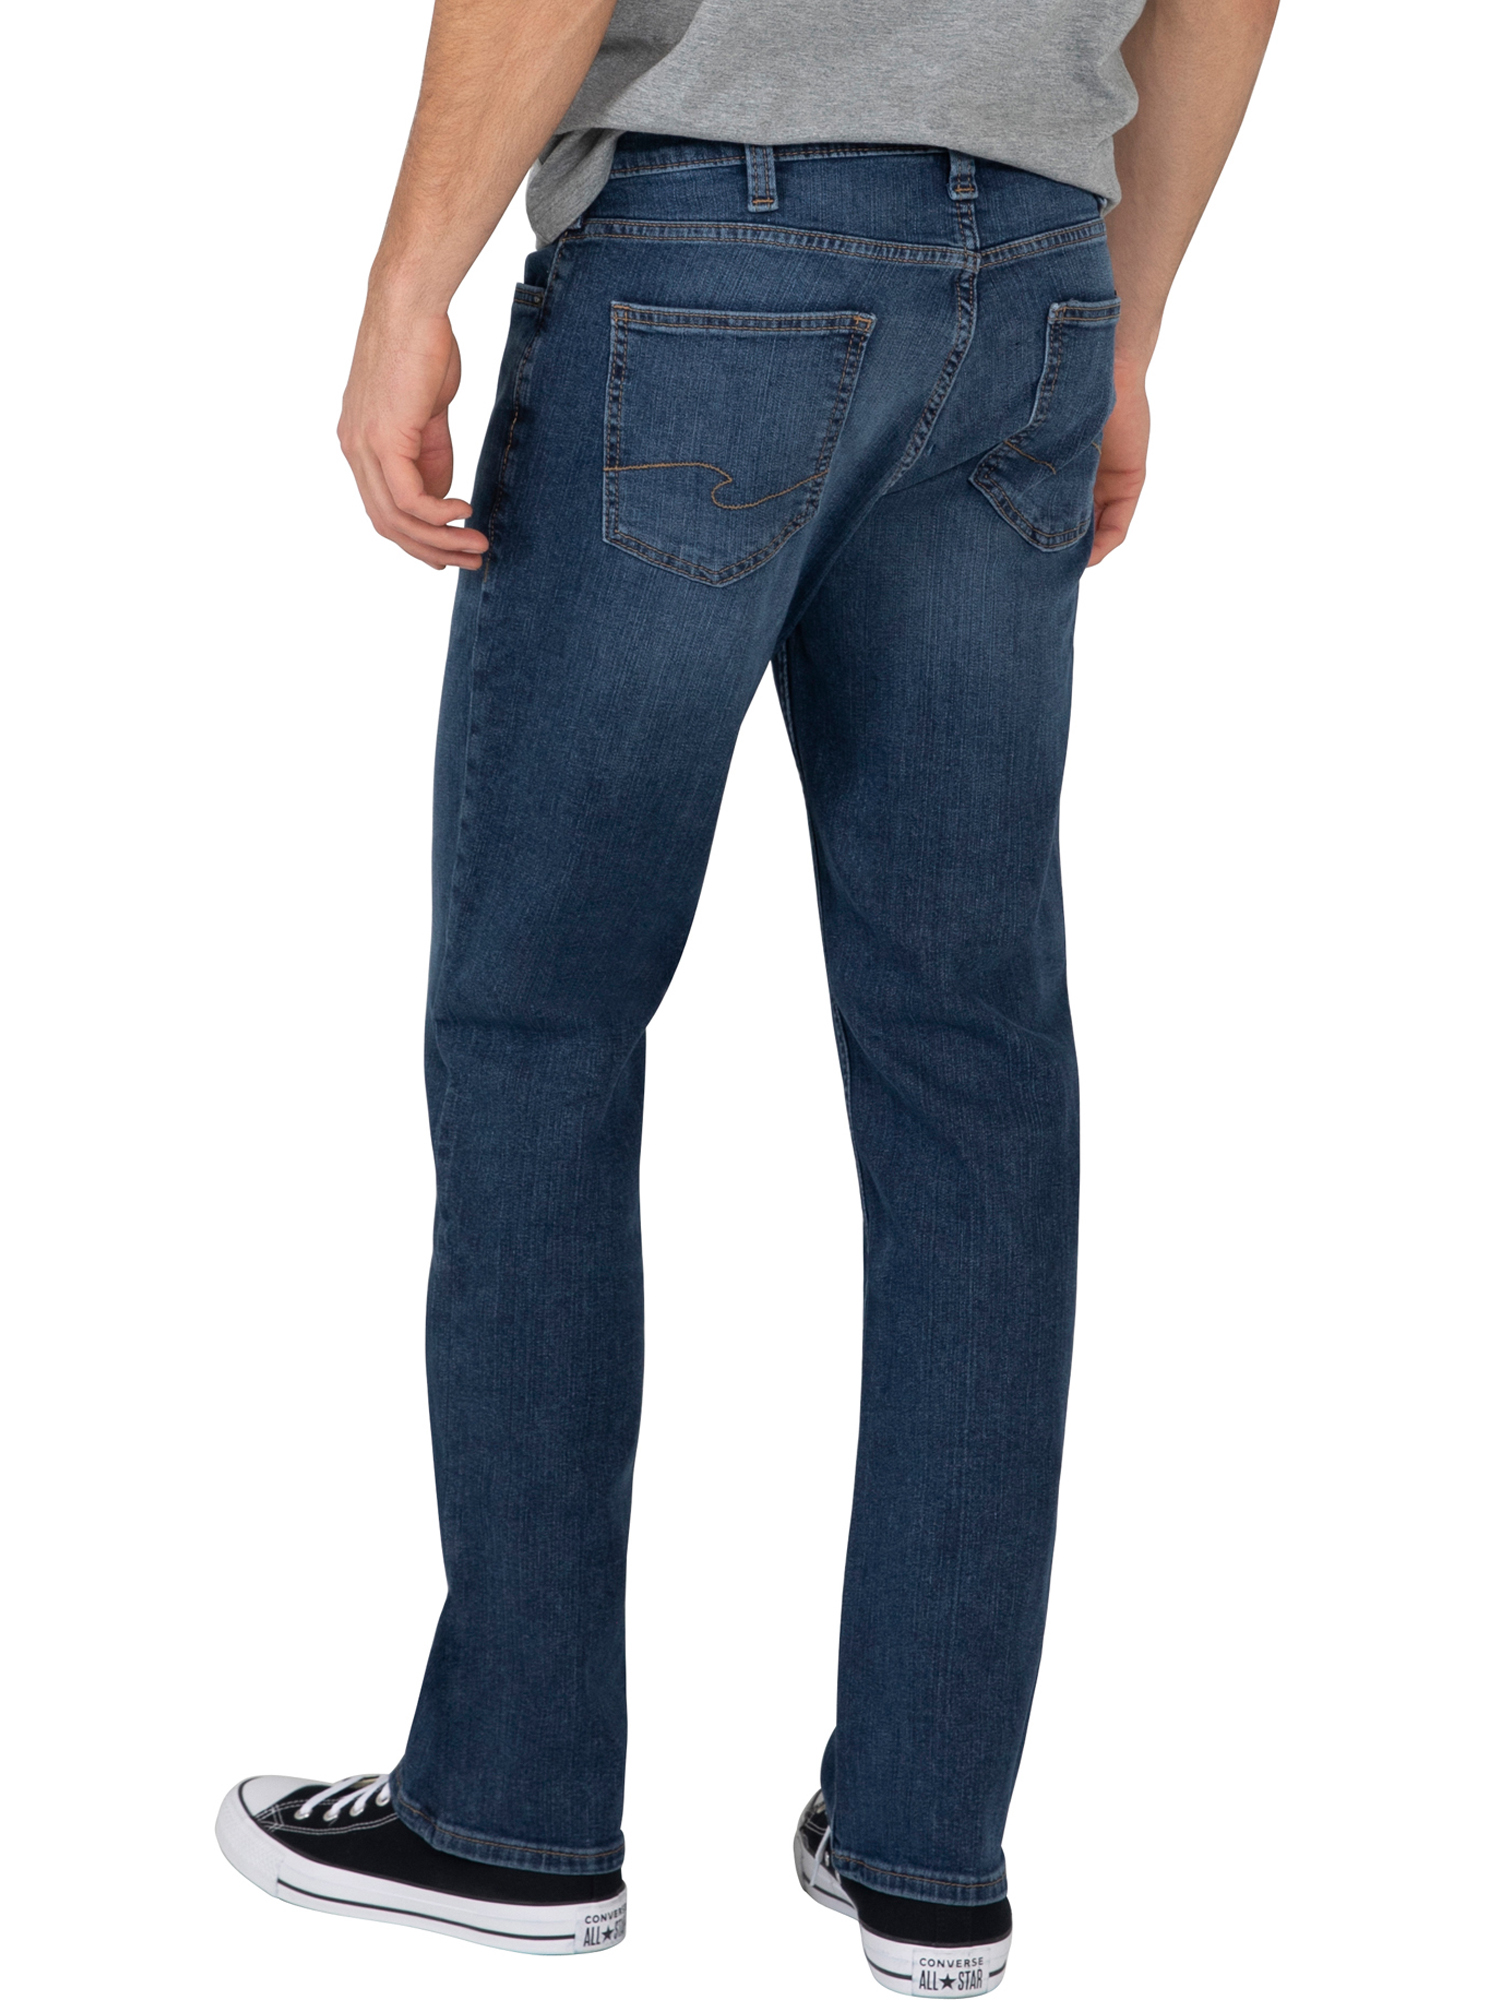 Authentic by Silver Jeans Co. Men's Relaxed Fit Straight Leg Jean, Waist Sizes 28-44 - image 3 of 3